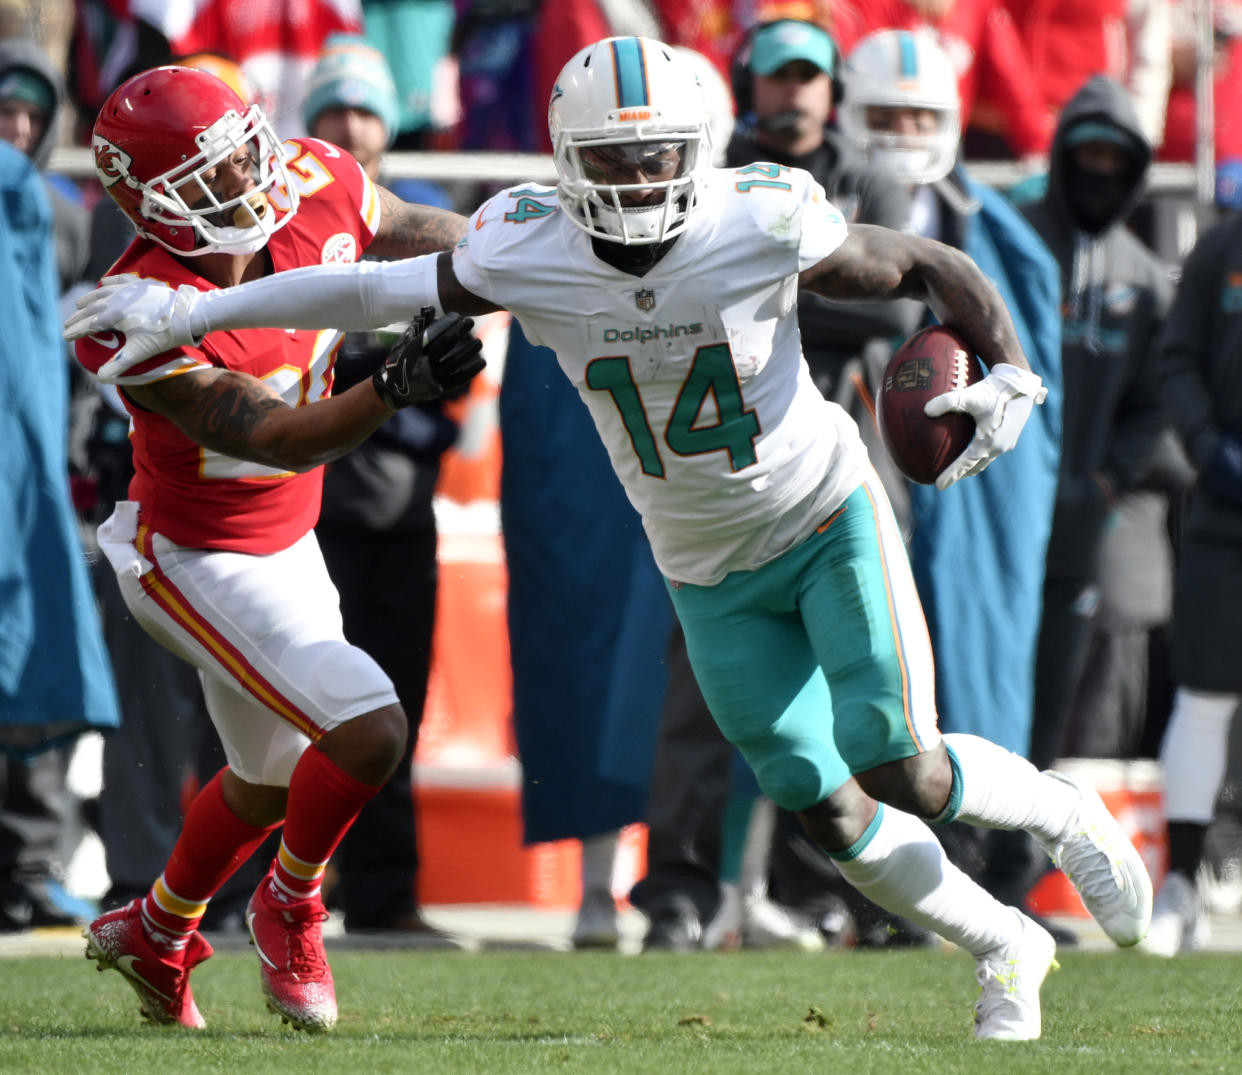 The Browns agreed to trade for Dolphins wide receiver Jarvis Landry. (AP)